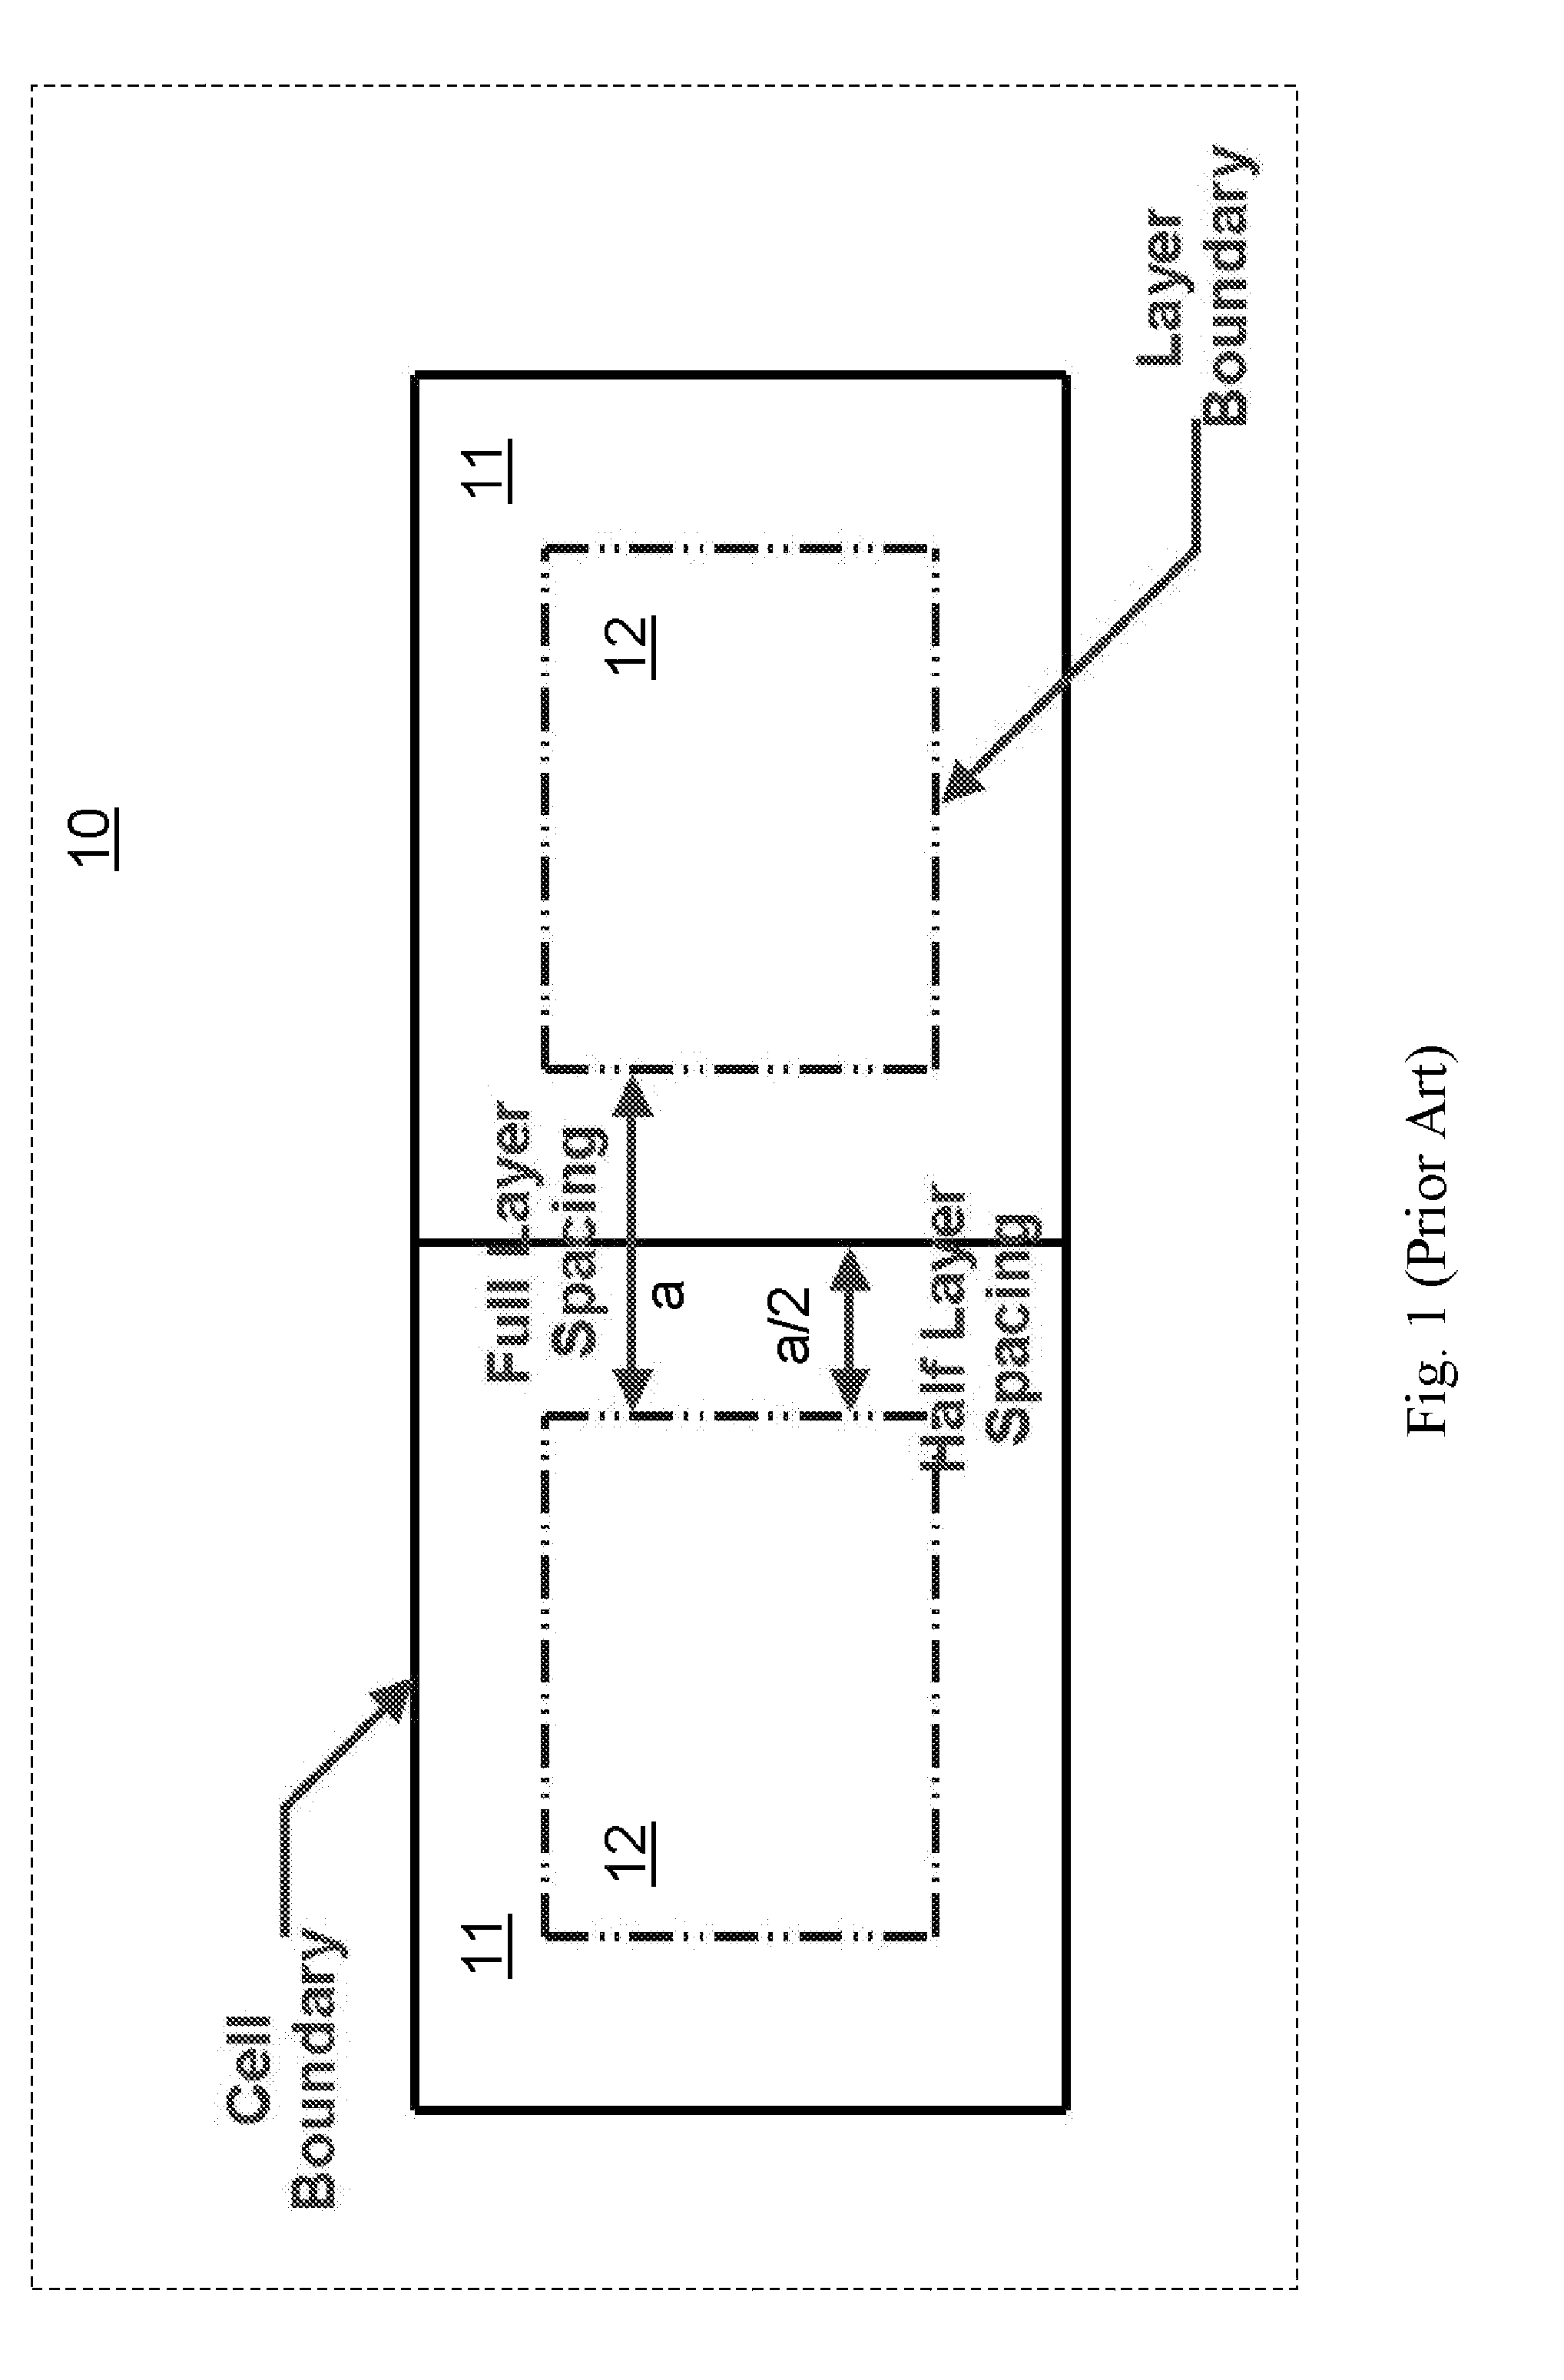 Standard Cell Architecture and Methods with Variable Design Rules